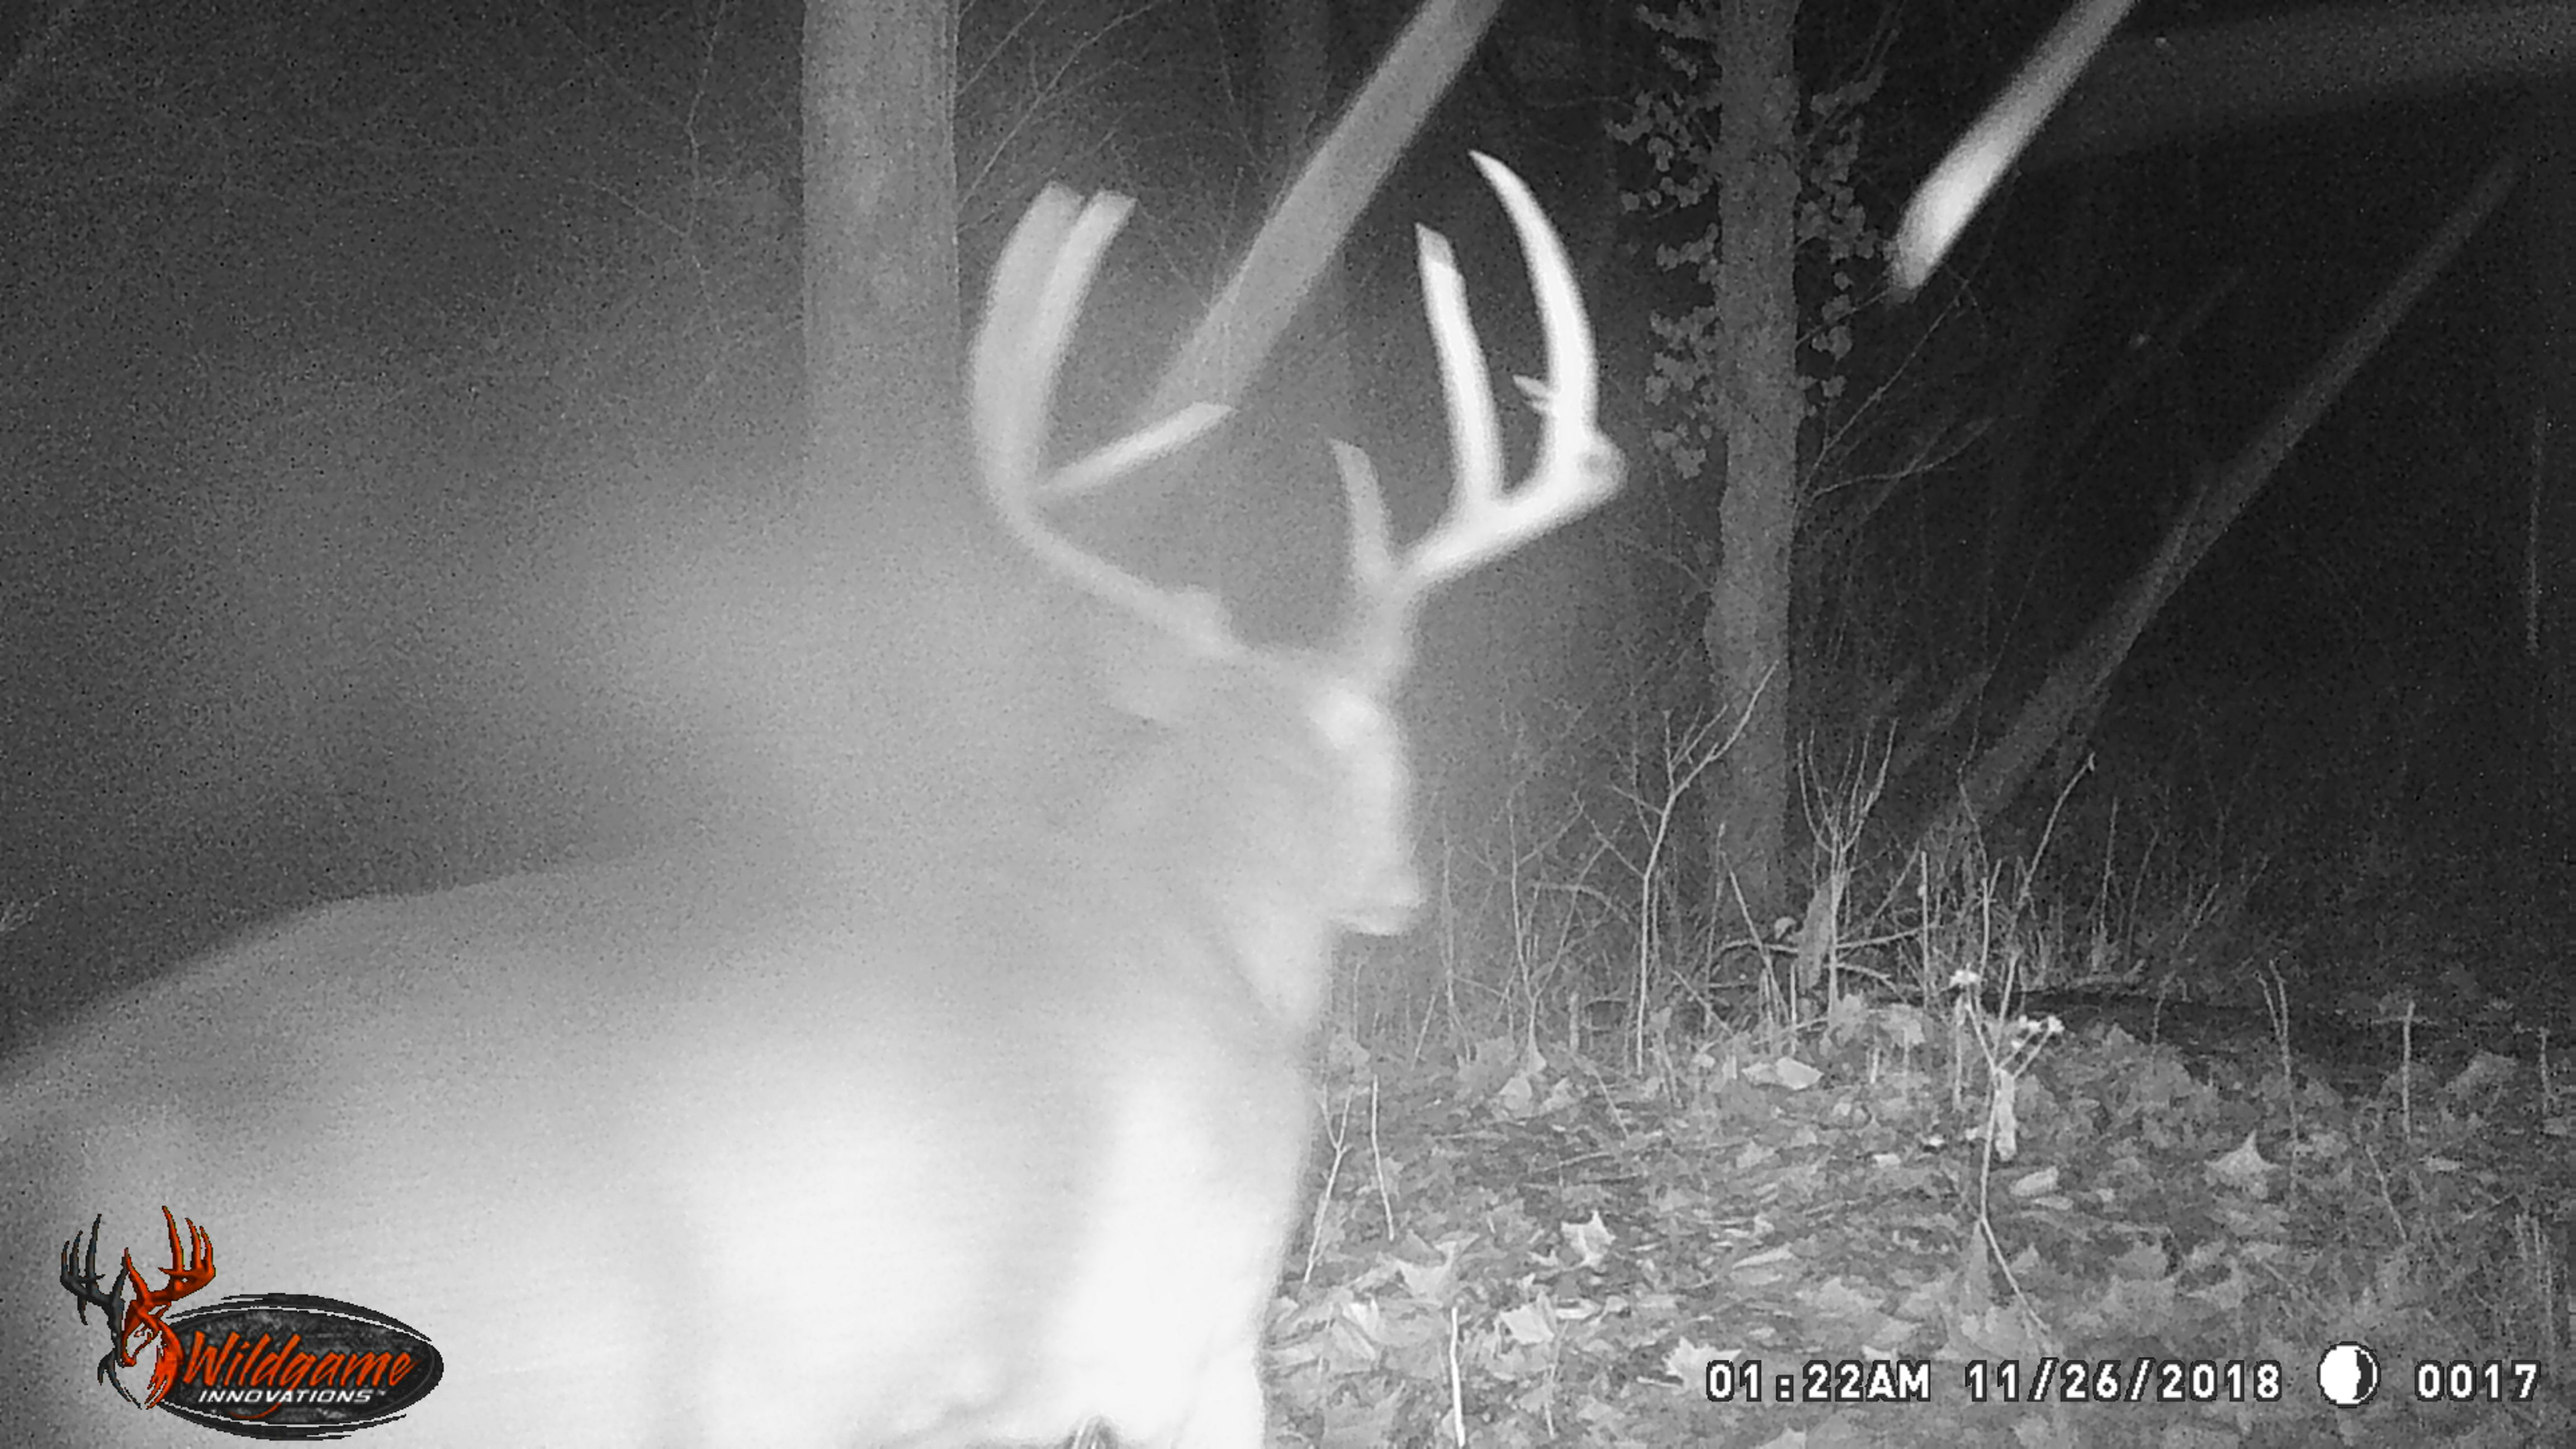 Giant whitetail buck on game camera